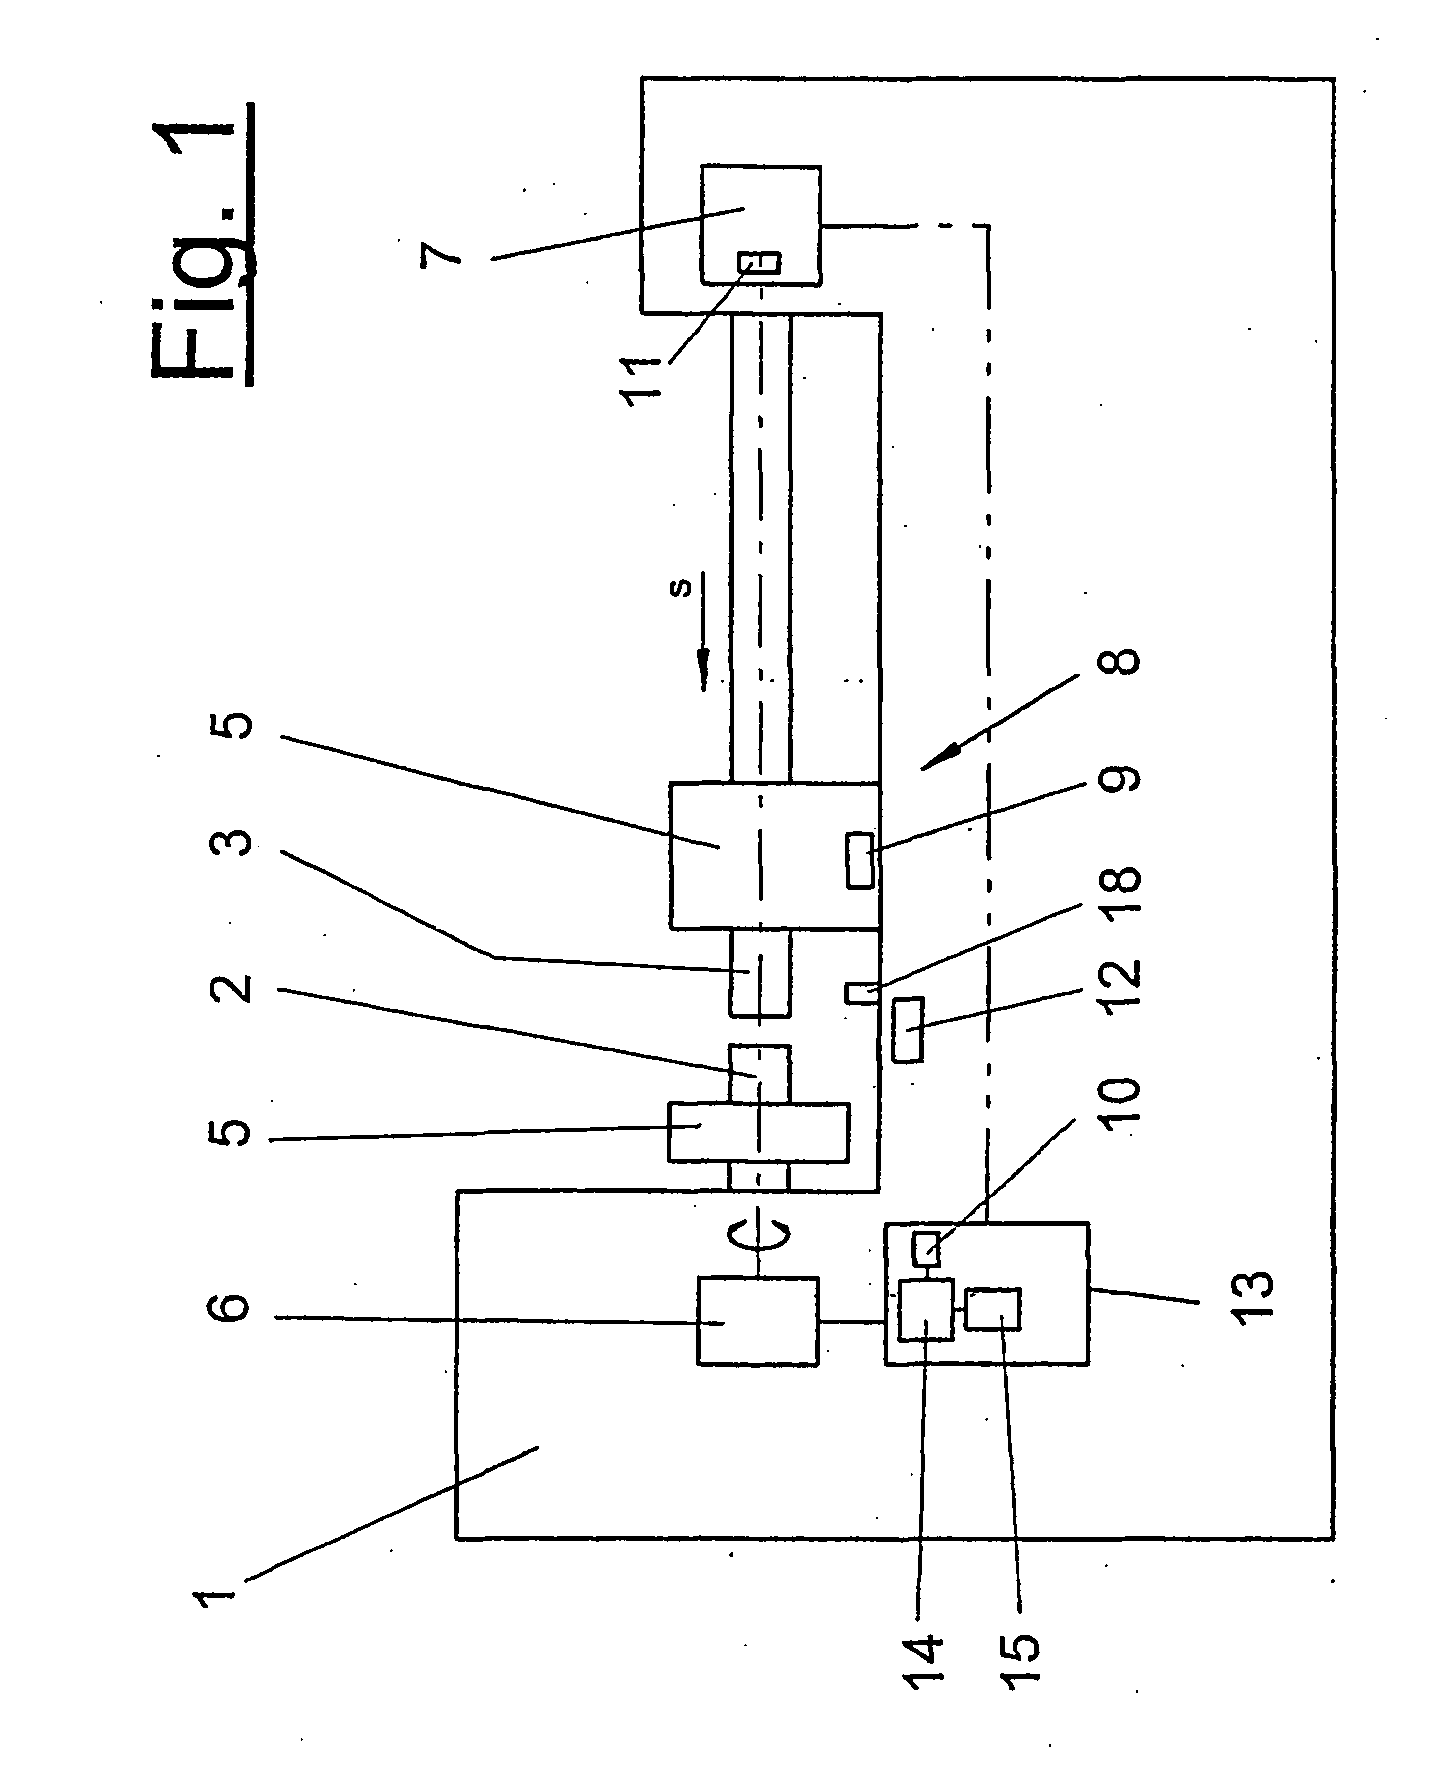 Method and device for pressure welding, which takes into account deviations in the length of workpieces